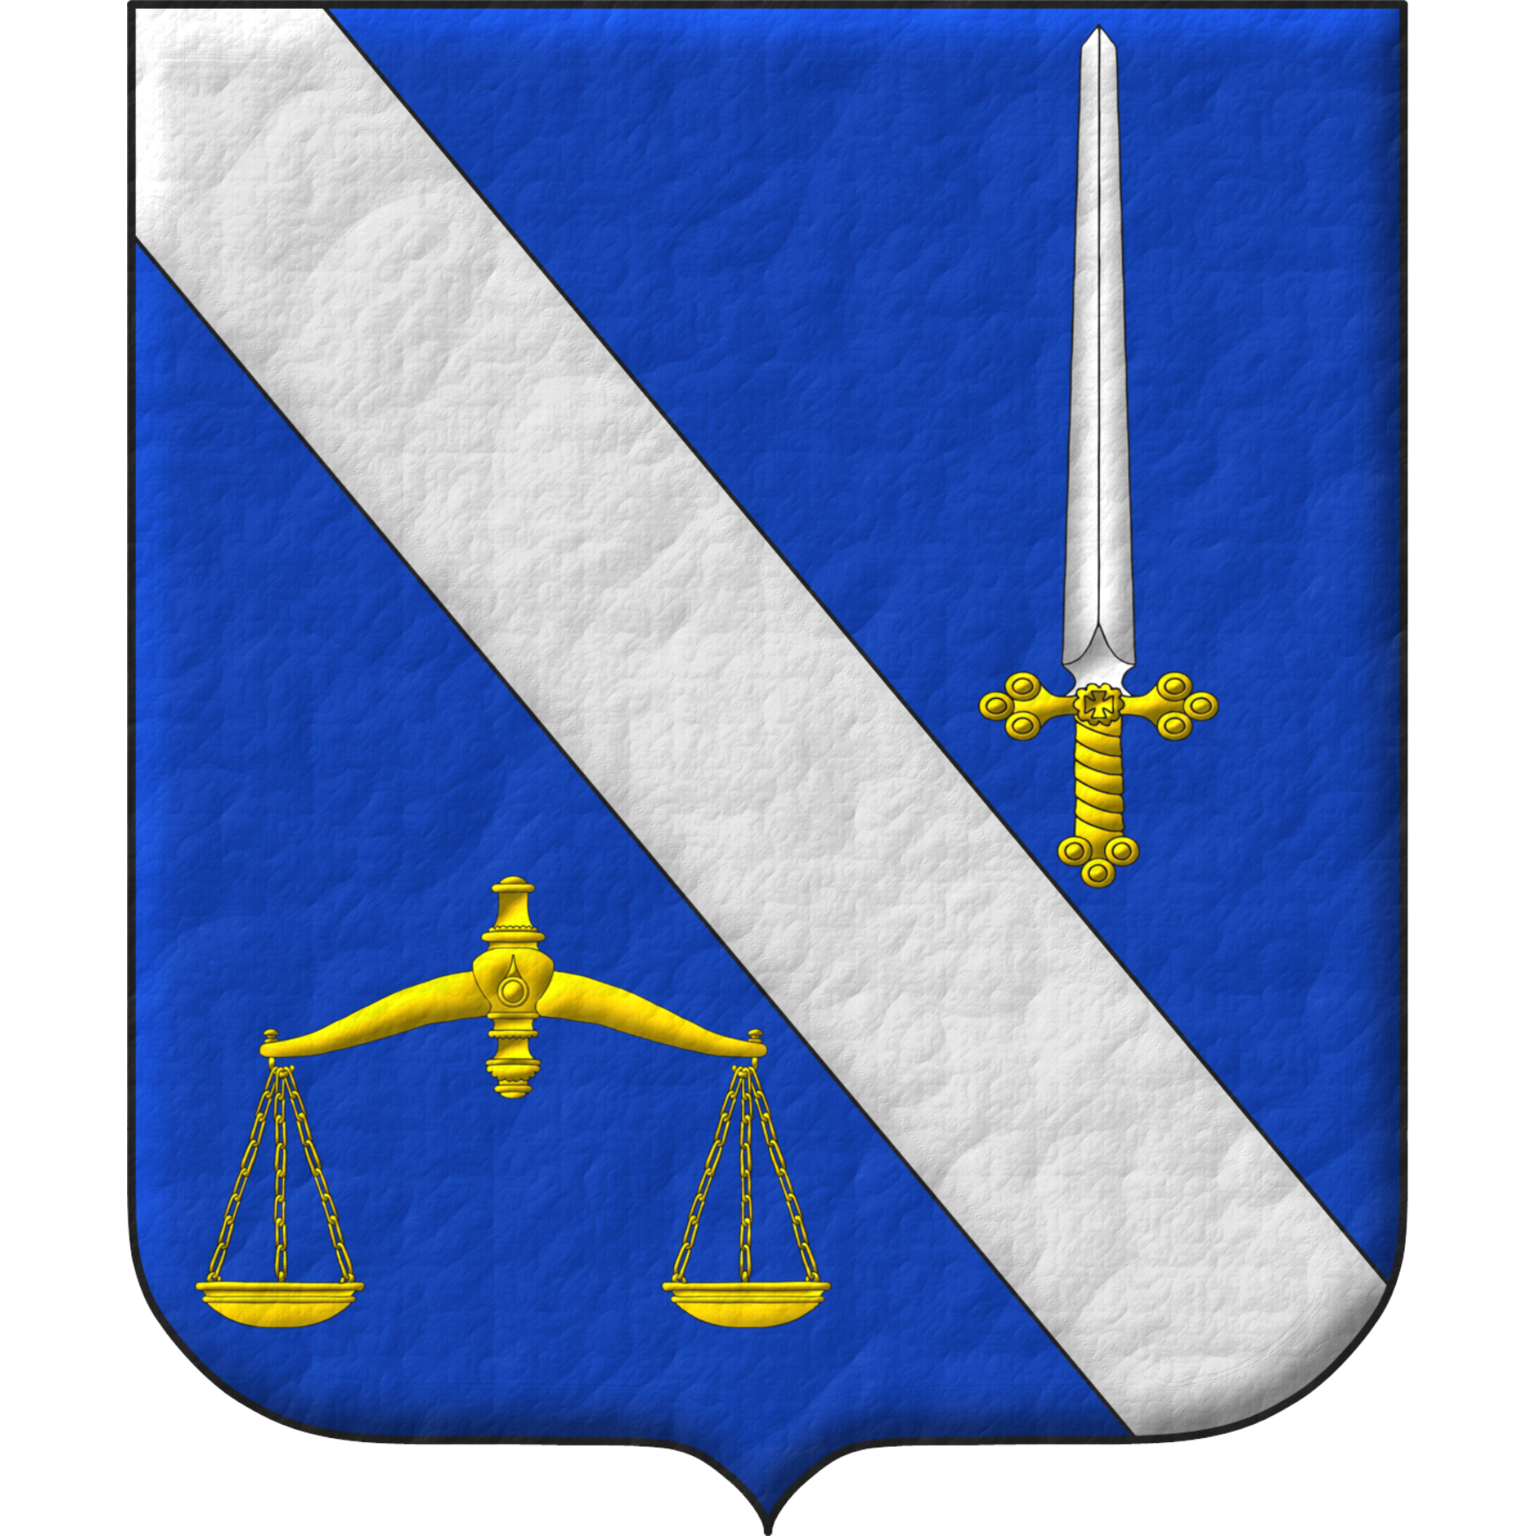 Azure, a bend Argent between, in chief a sword point upwards Argent, hilted Or, in base a pair of scales Or.